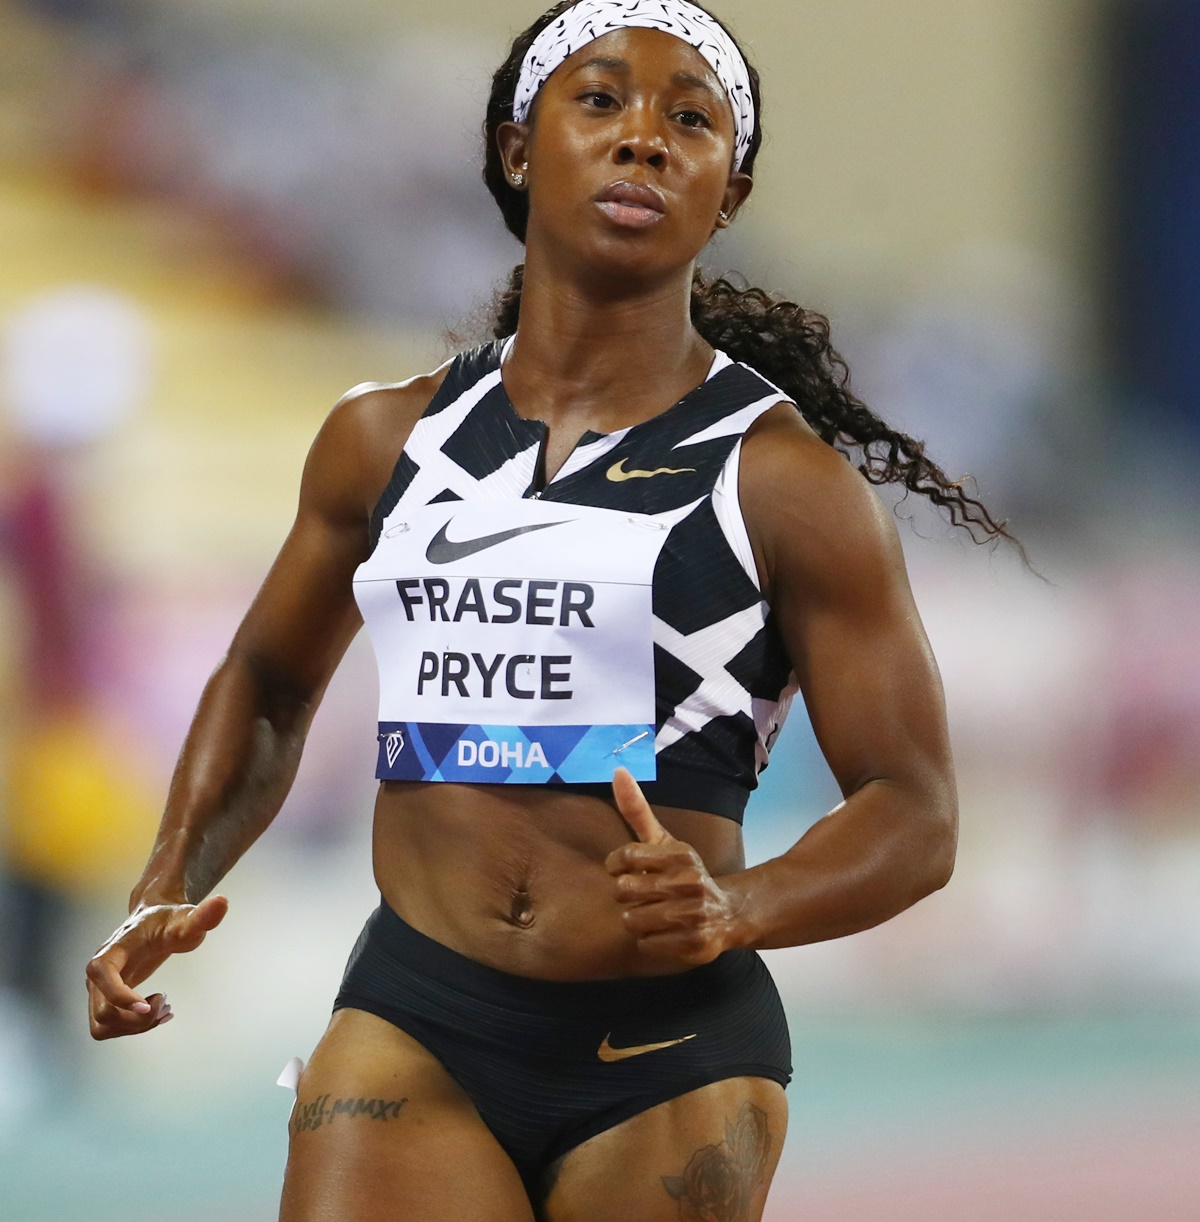 Albums 101+ Images shelly ann fraser pryce photos Sharp